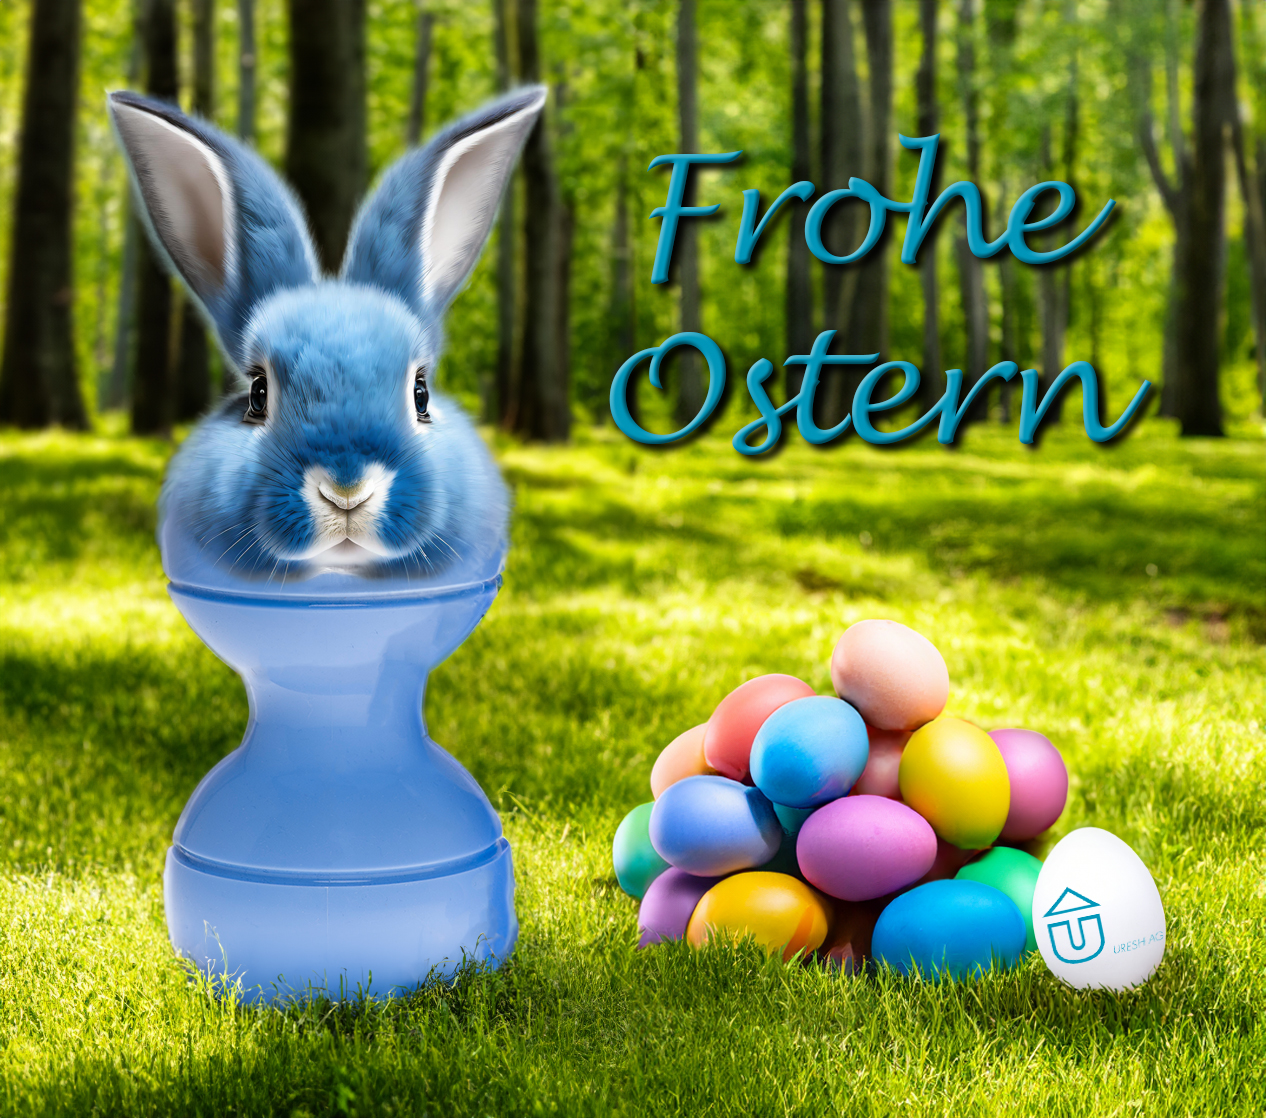 Featured image for “Frohe Ostern”